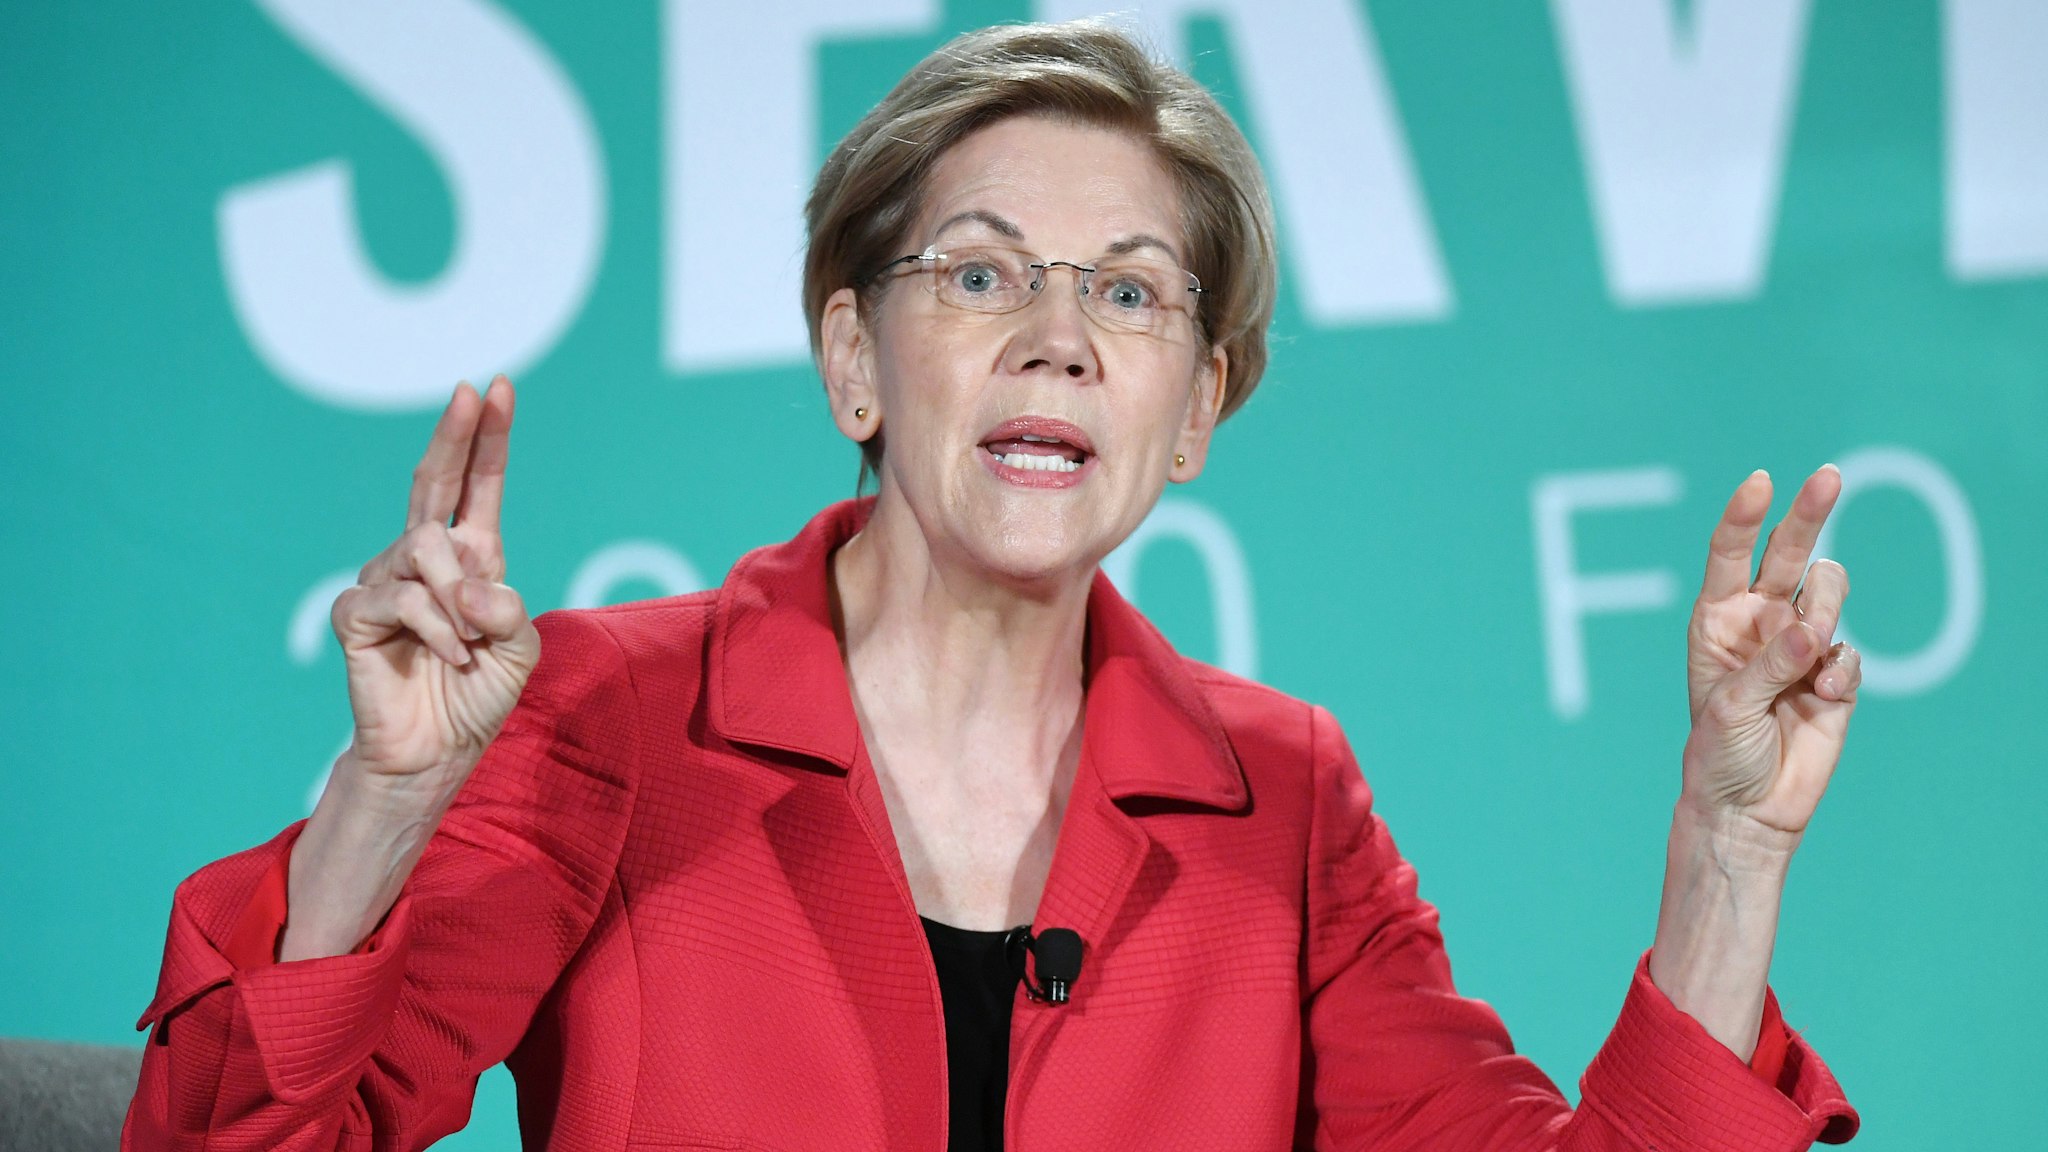 LAS VEGAS, NEVADA - AUGUST 03: Democratic presidential candidate and U.S. Sen. Elizabeth Warren (D-MA) speaks during the 2020 Public Service Forum hosted by the American Federation of State, County and Municipal Employees (AFSCME) at UNLV on August 3, 2019 in Las Vegas, Nevada.